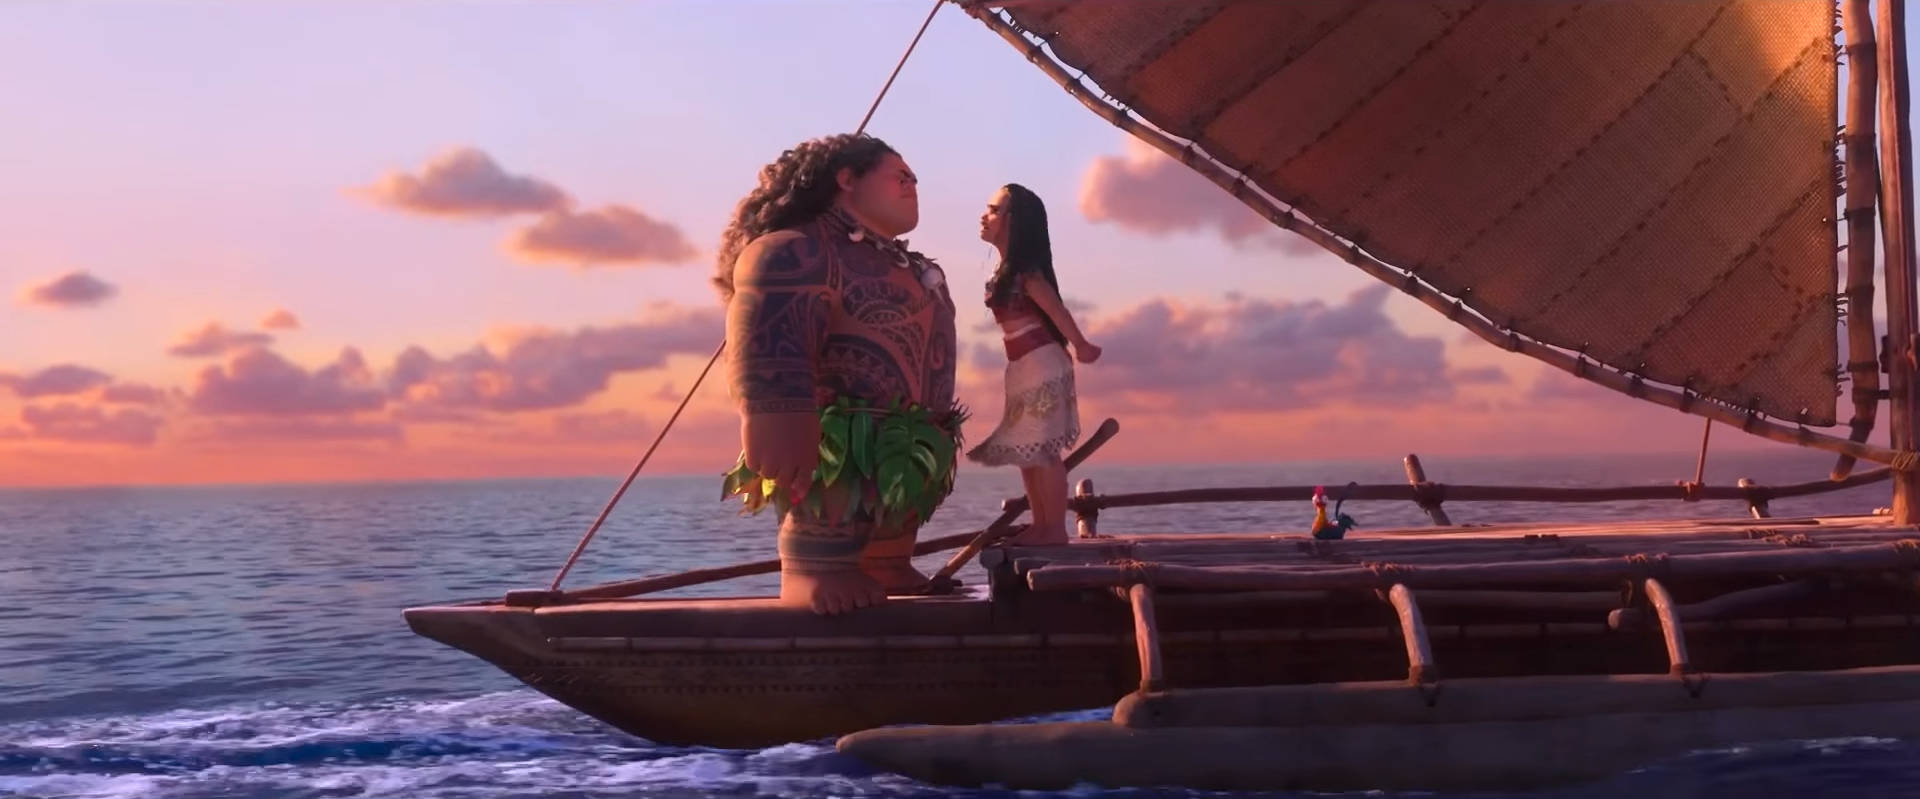 Moana In Front Of Maui Wallpaper